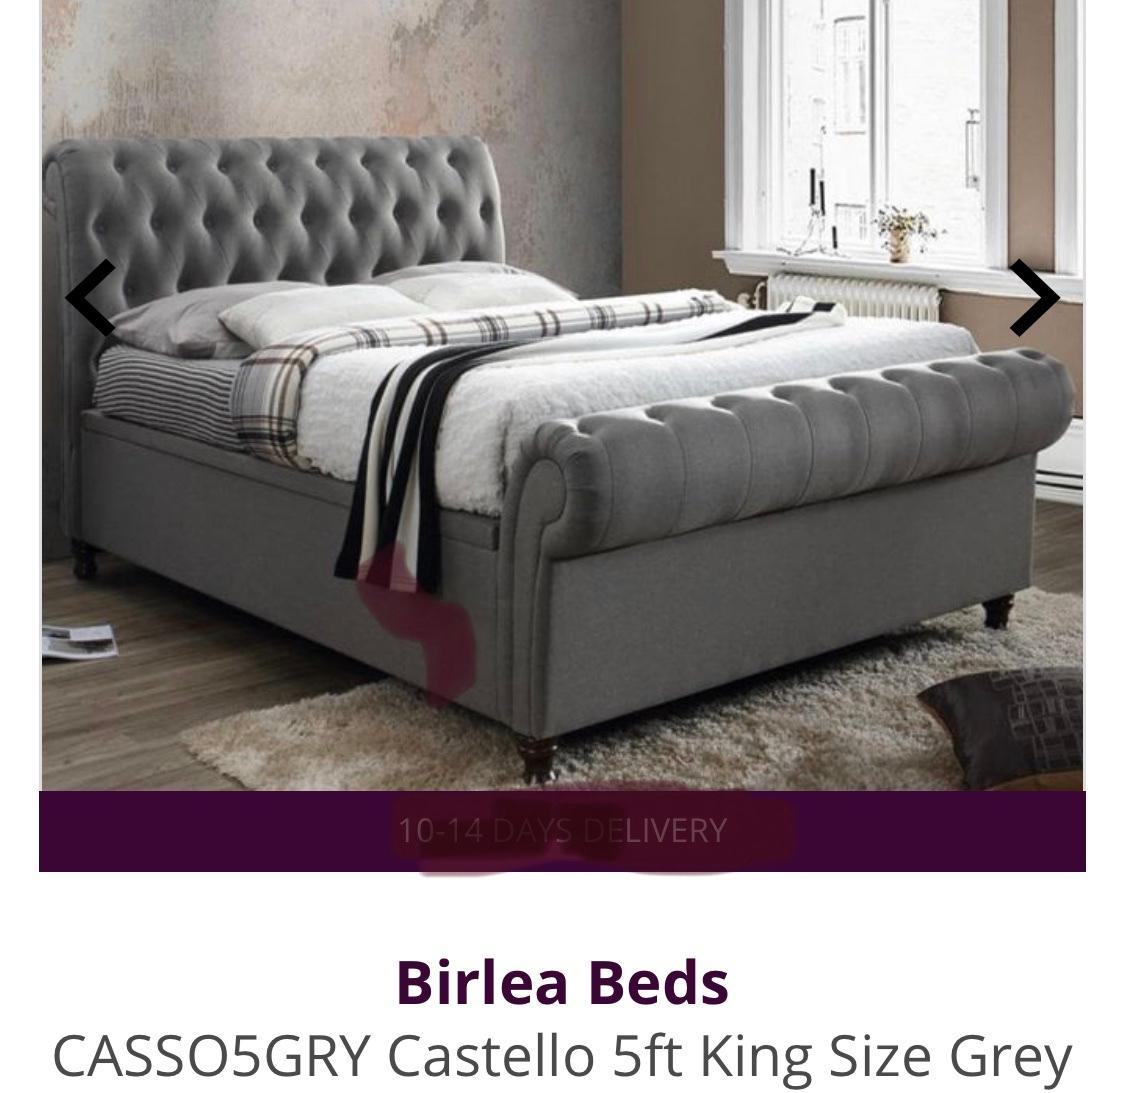 Bed King Size In Bn3 Hove For 250 00, Grey Sleigh Bed King Size